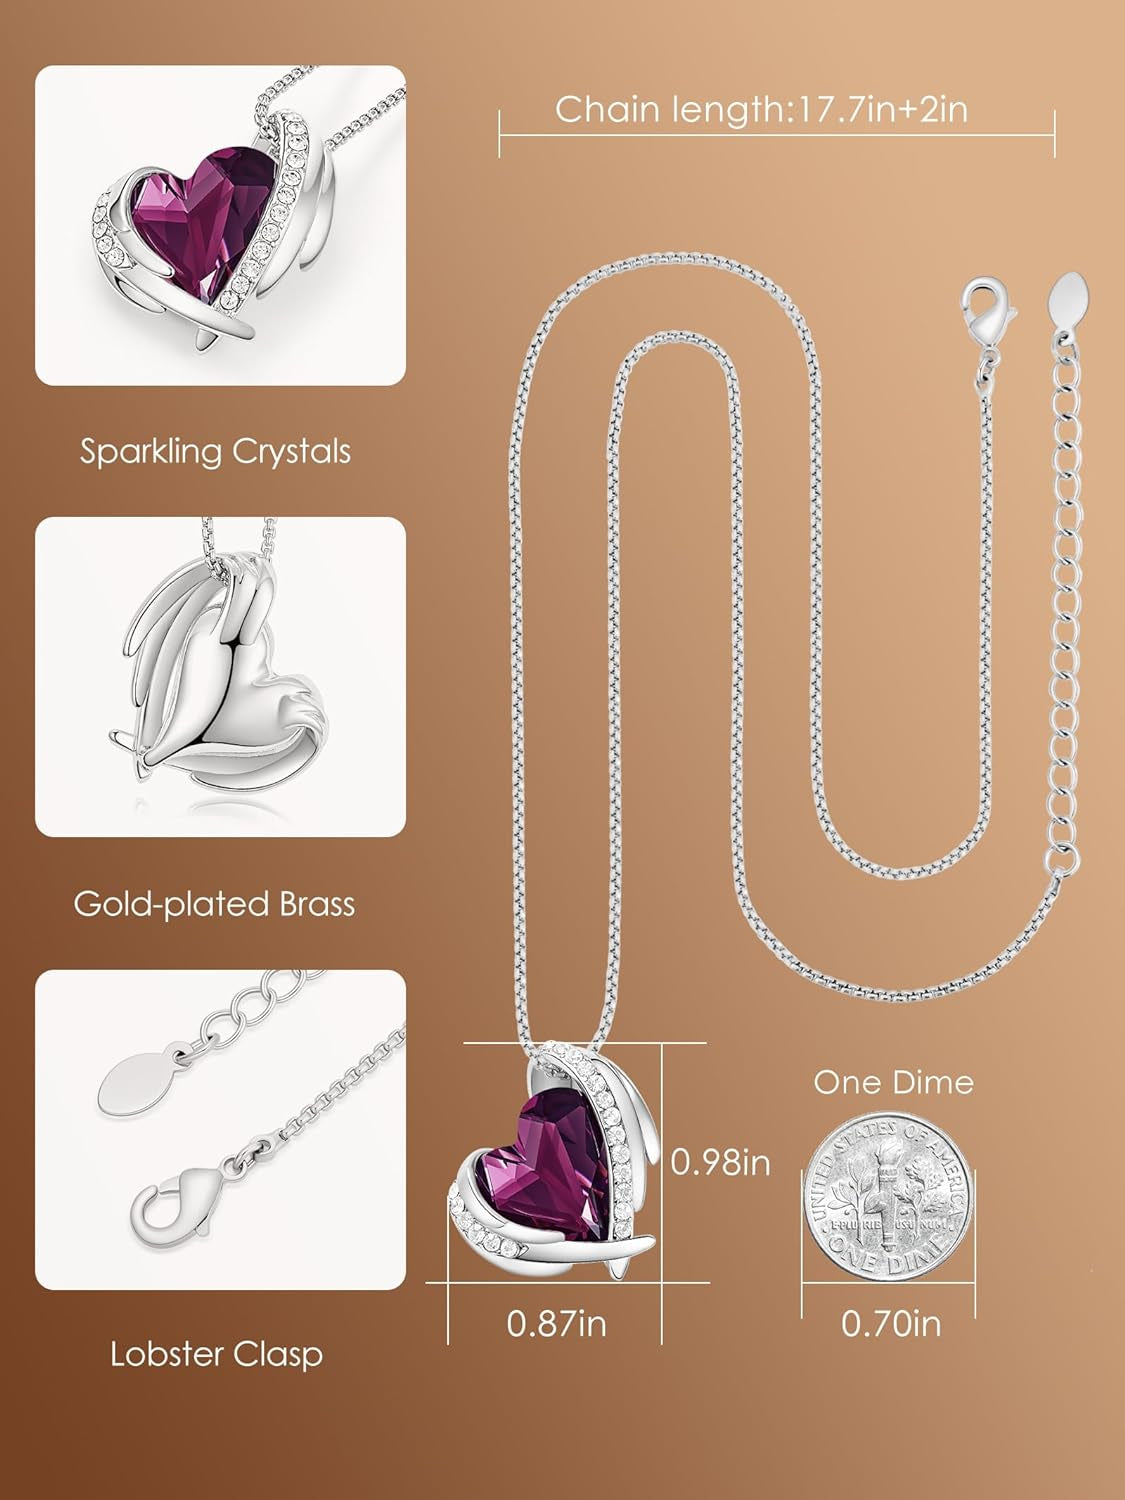 Elegance in Every Beat: Love Heart Pendant Necklaces – White Gold Plated Tones Adorned with Amethyst Purple Crystal, Birthstone Accents - Perfect for Valentine's Day